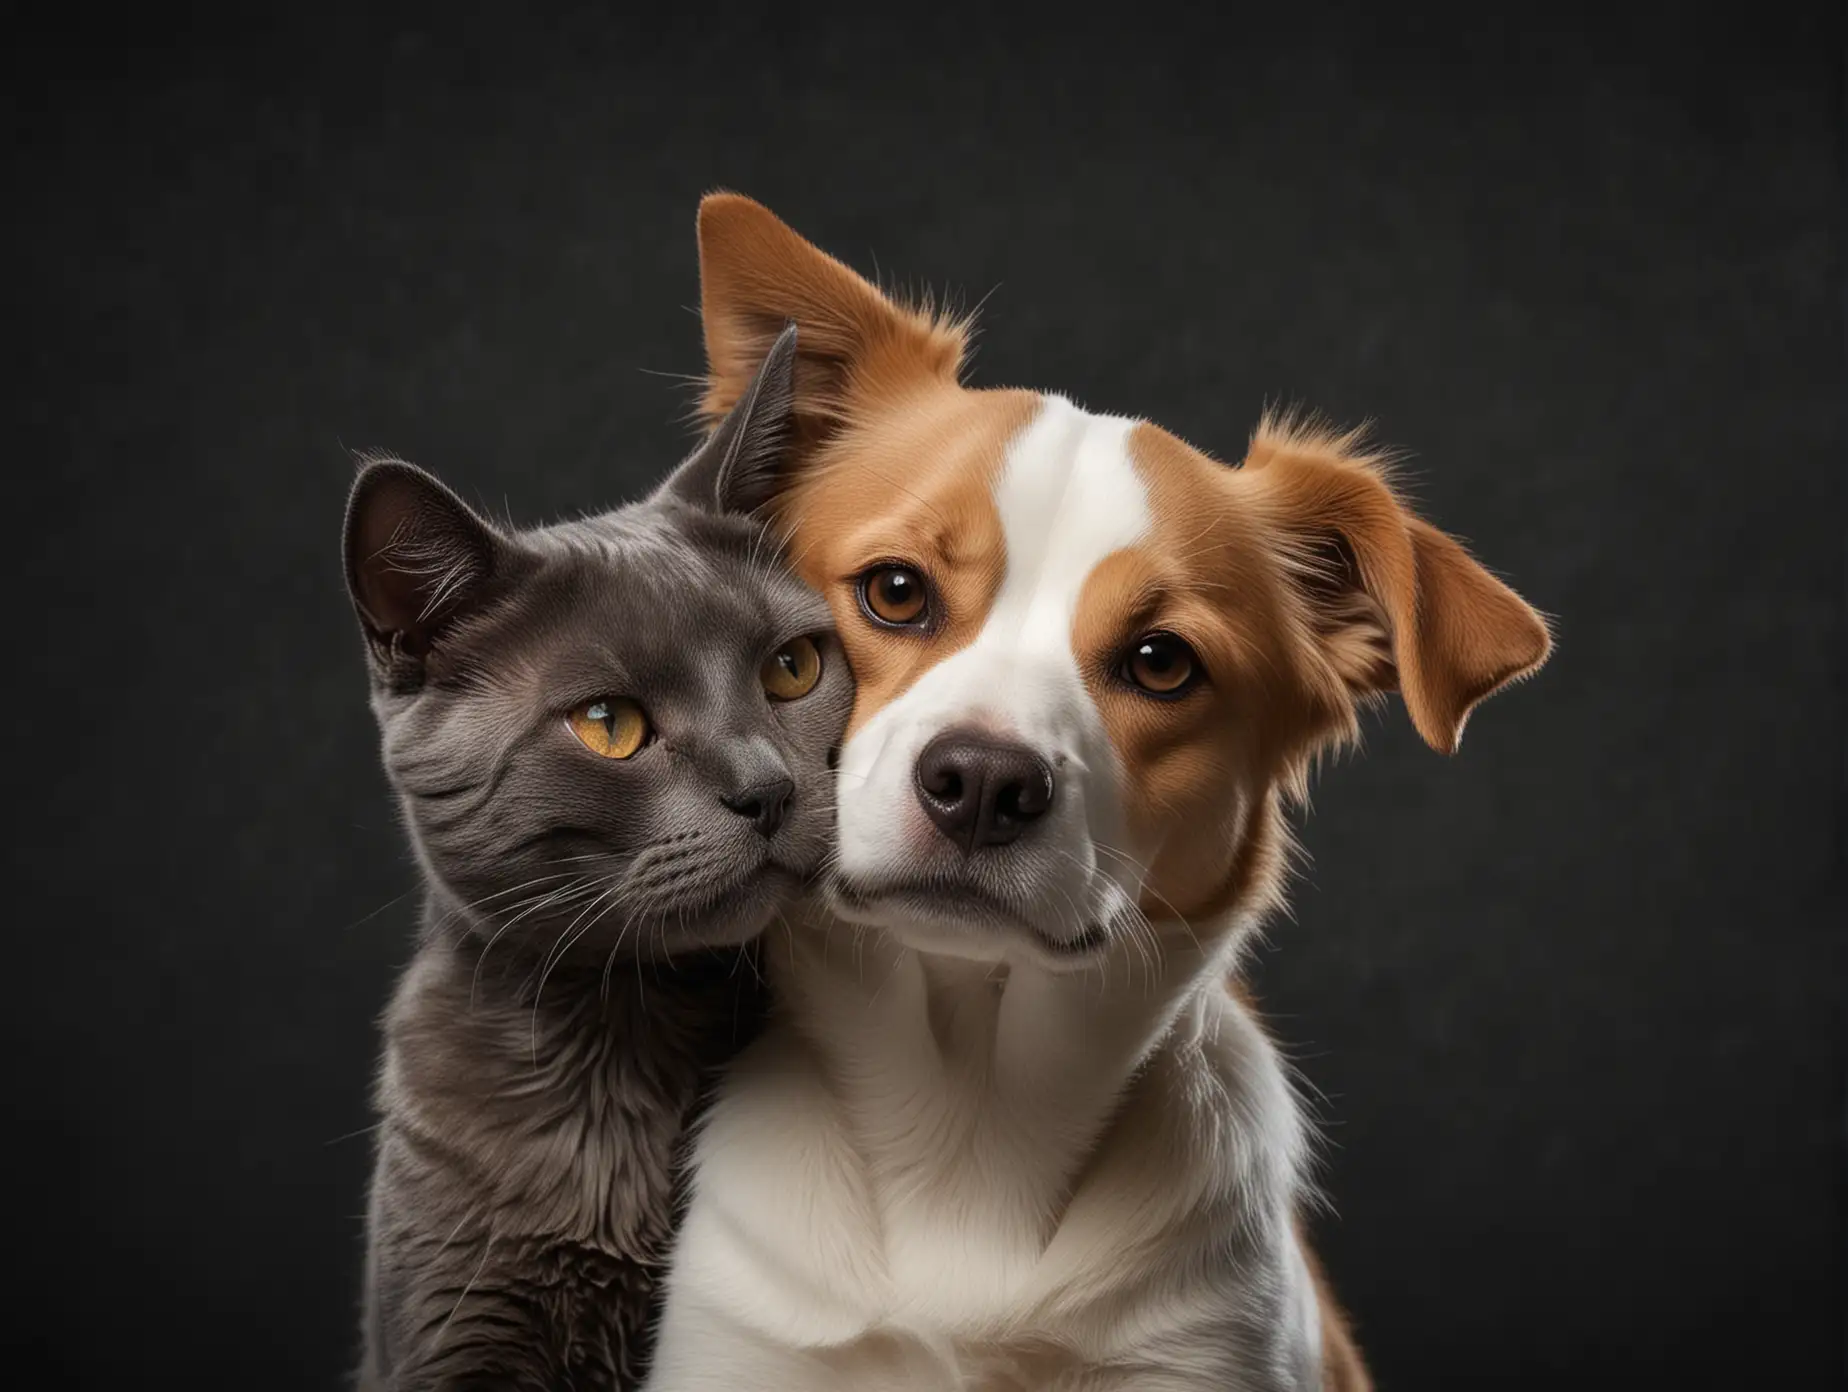 side by side heads of hugging dog and cat on dark background
 